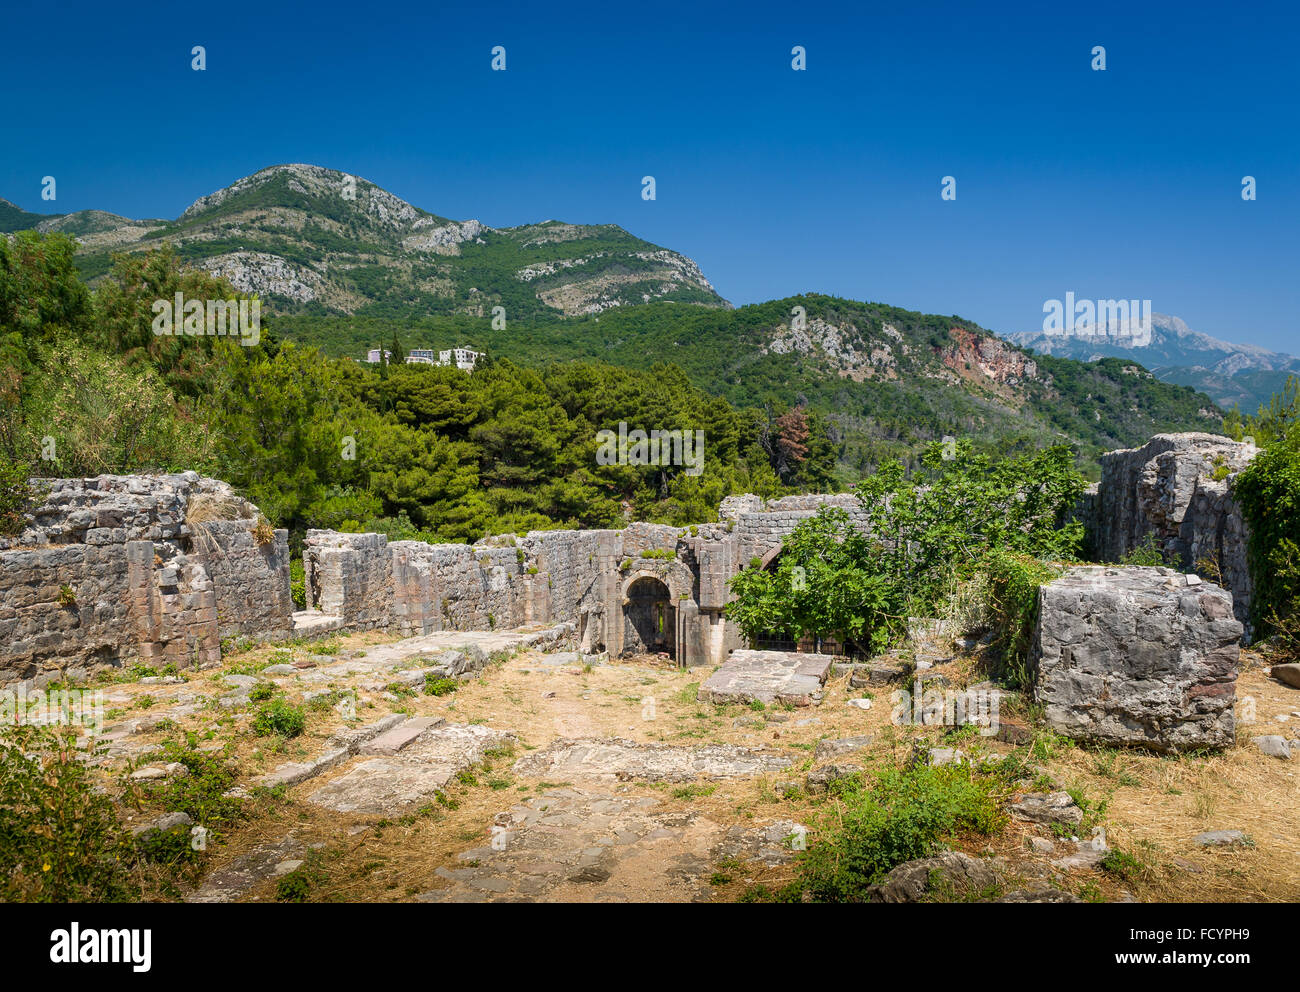 Ratac medieval fortress in Montenegro ruins. Stock Photo